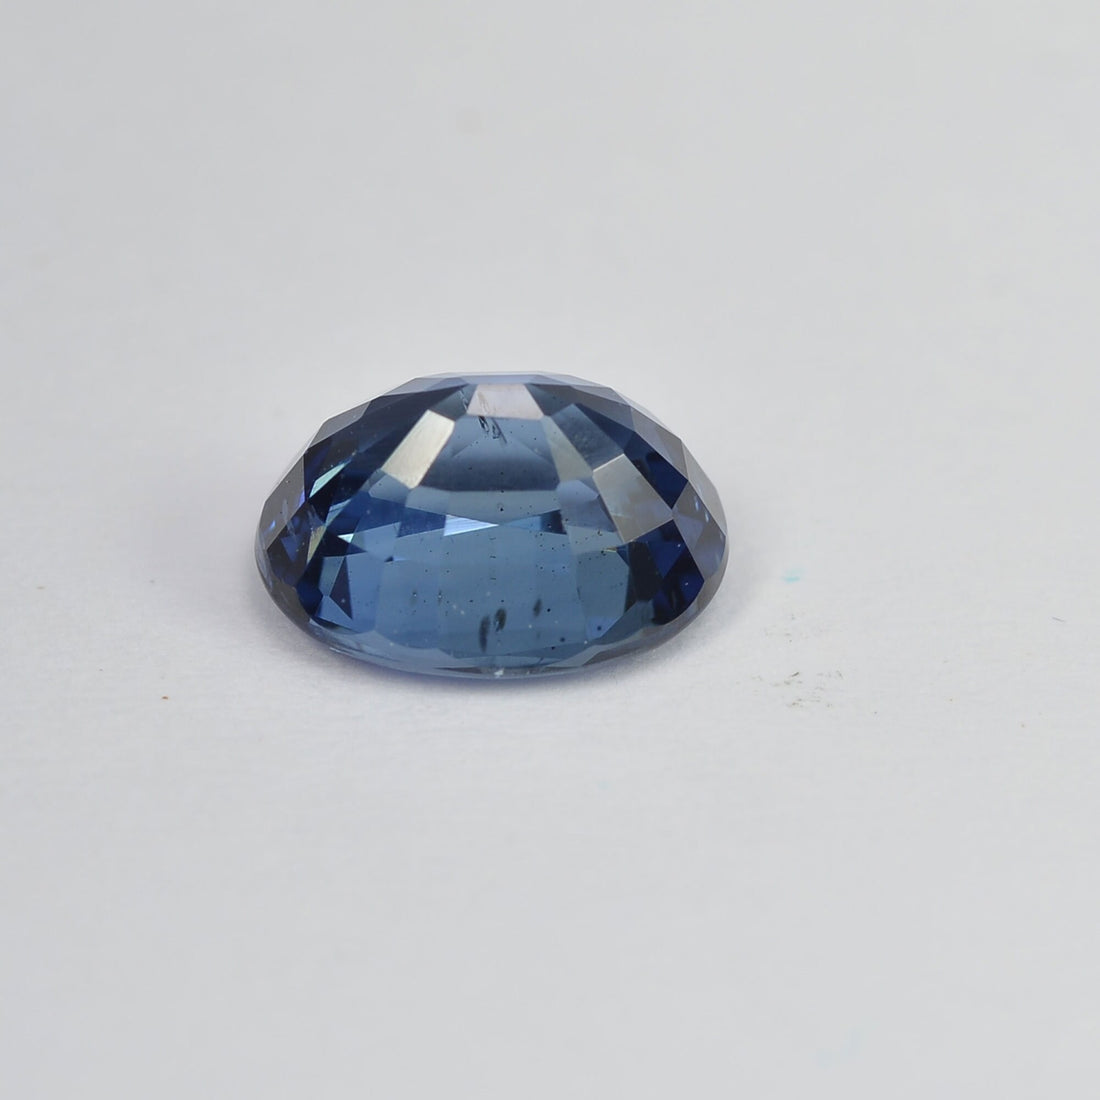 1.23 cts Natural Blue Sapphire Loose Gemstone Oval Cut Certified